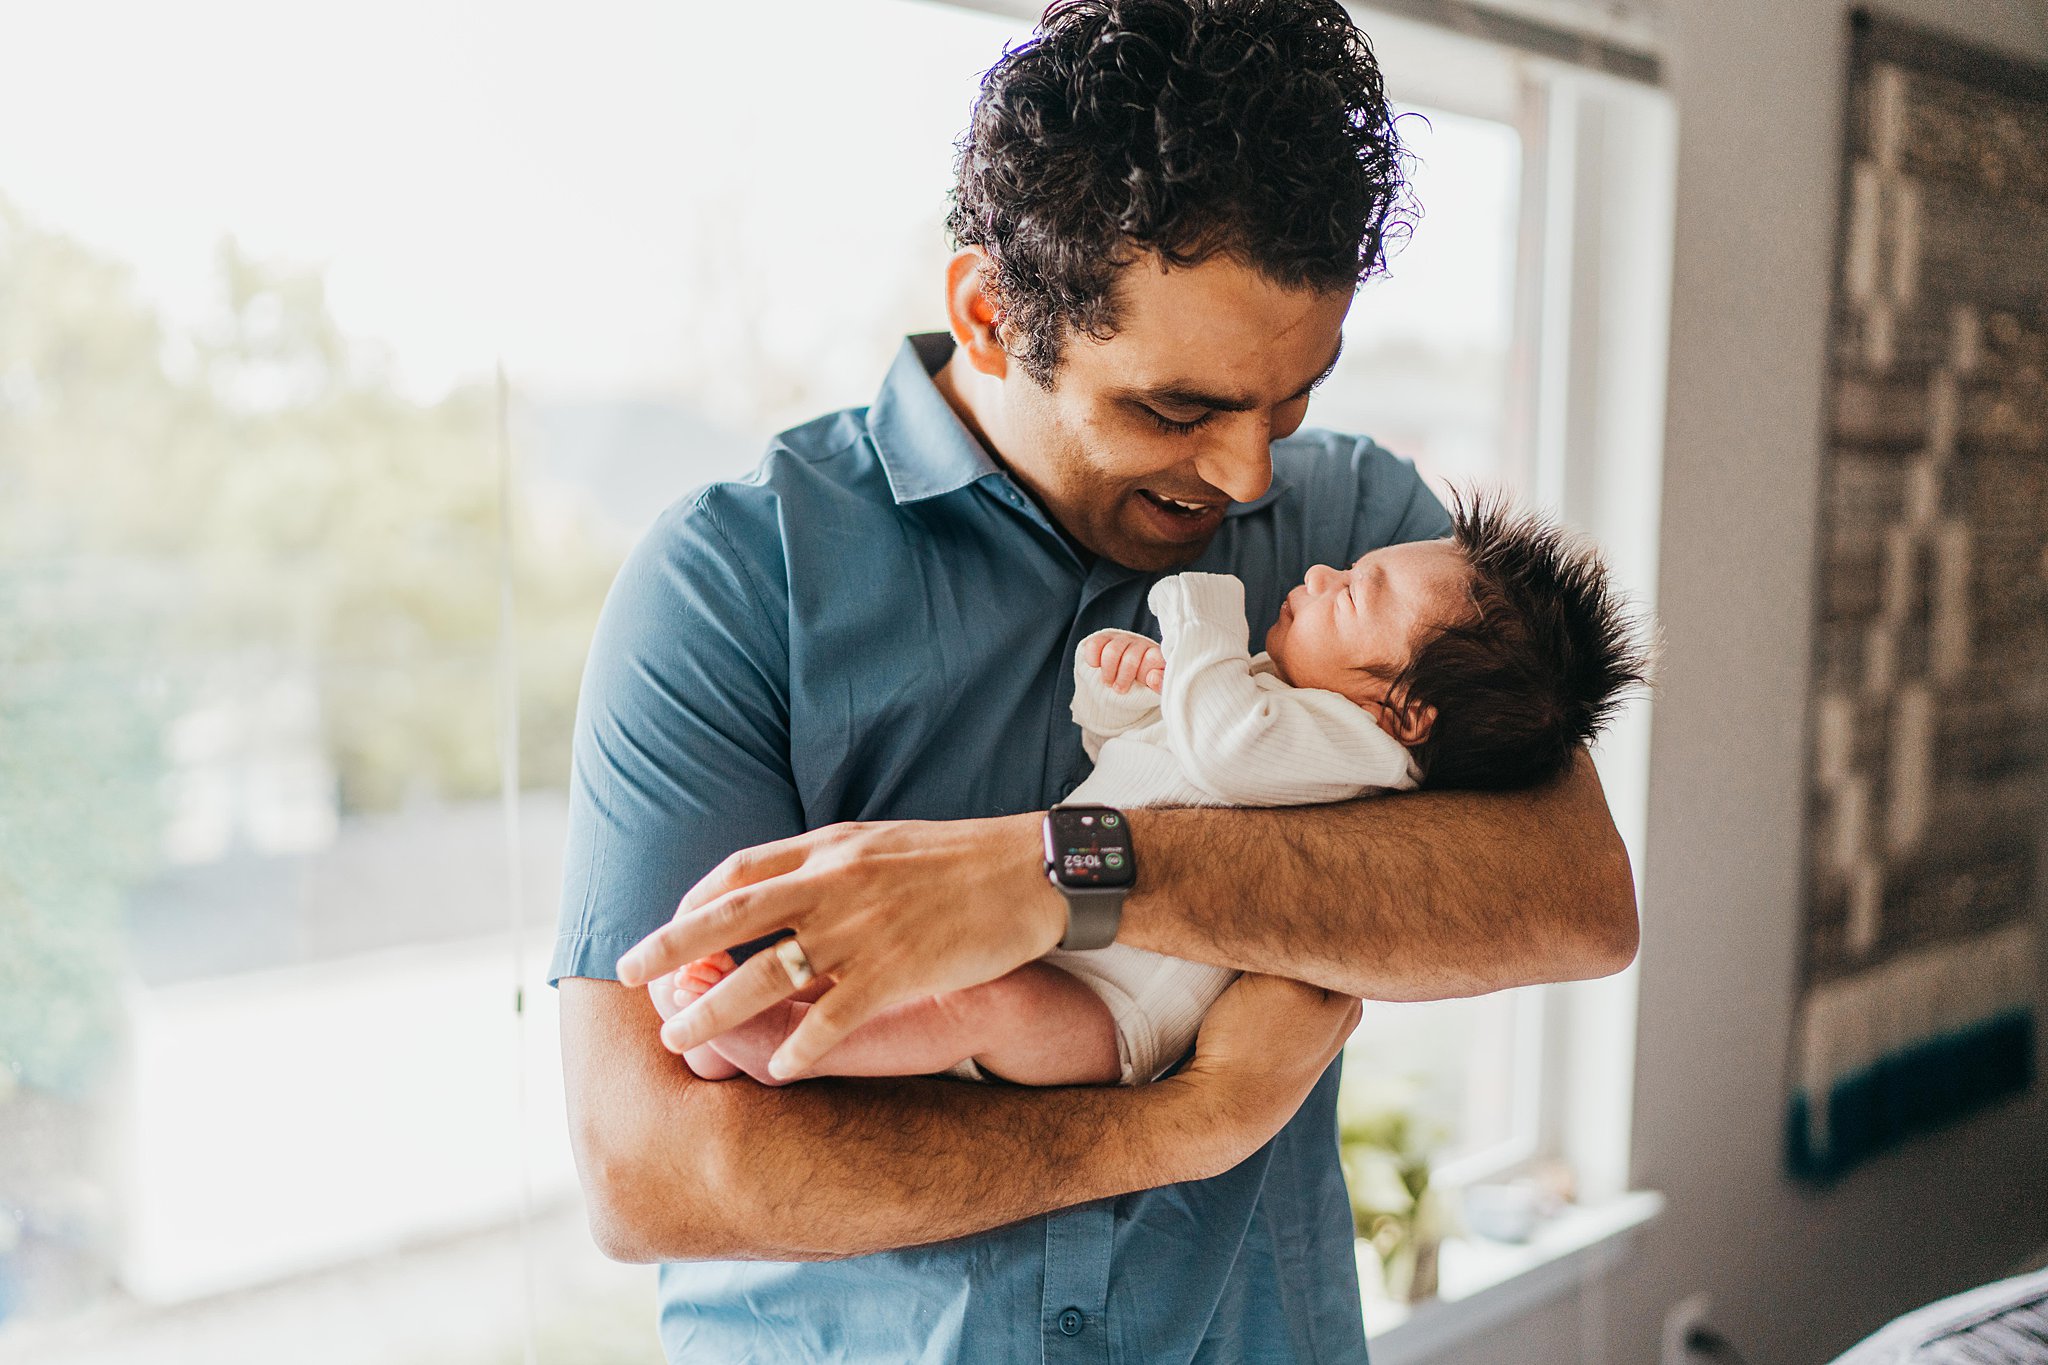 A new father smiles down at his sleeping newborn baby in his arms while standing by a window baby diaper service seattle